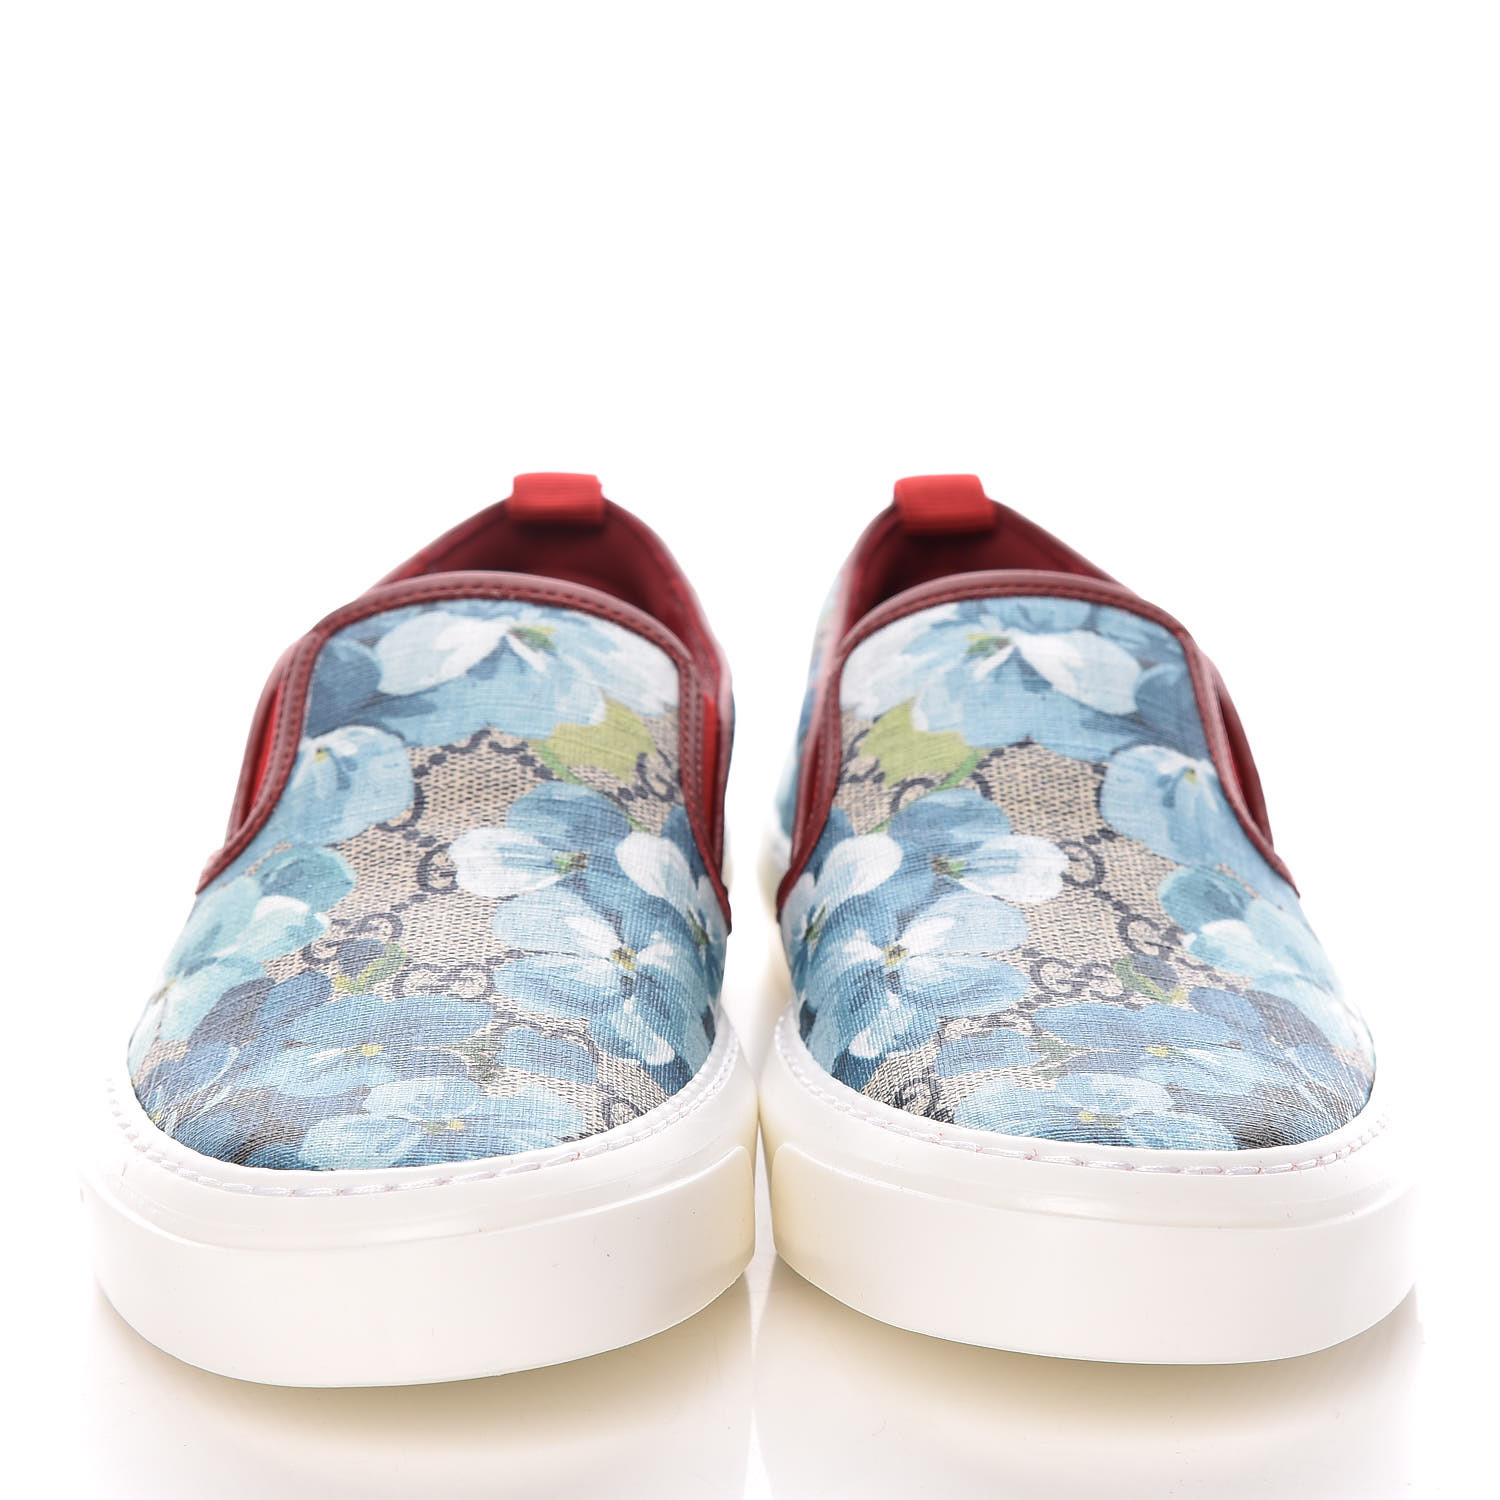 GUCCI GG Supreme Monogram Blooms Womens Slip On Sneakers 39 Blue 